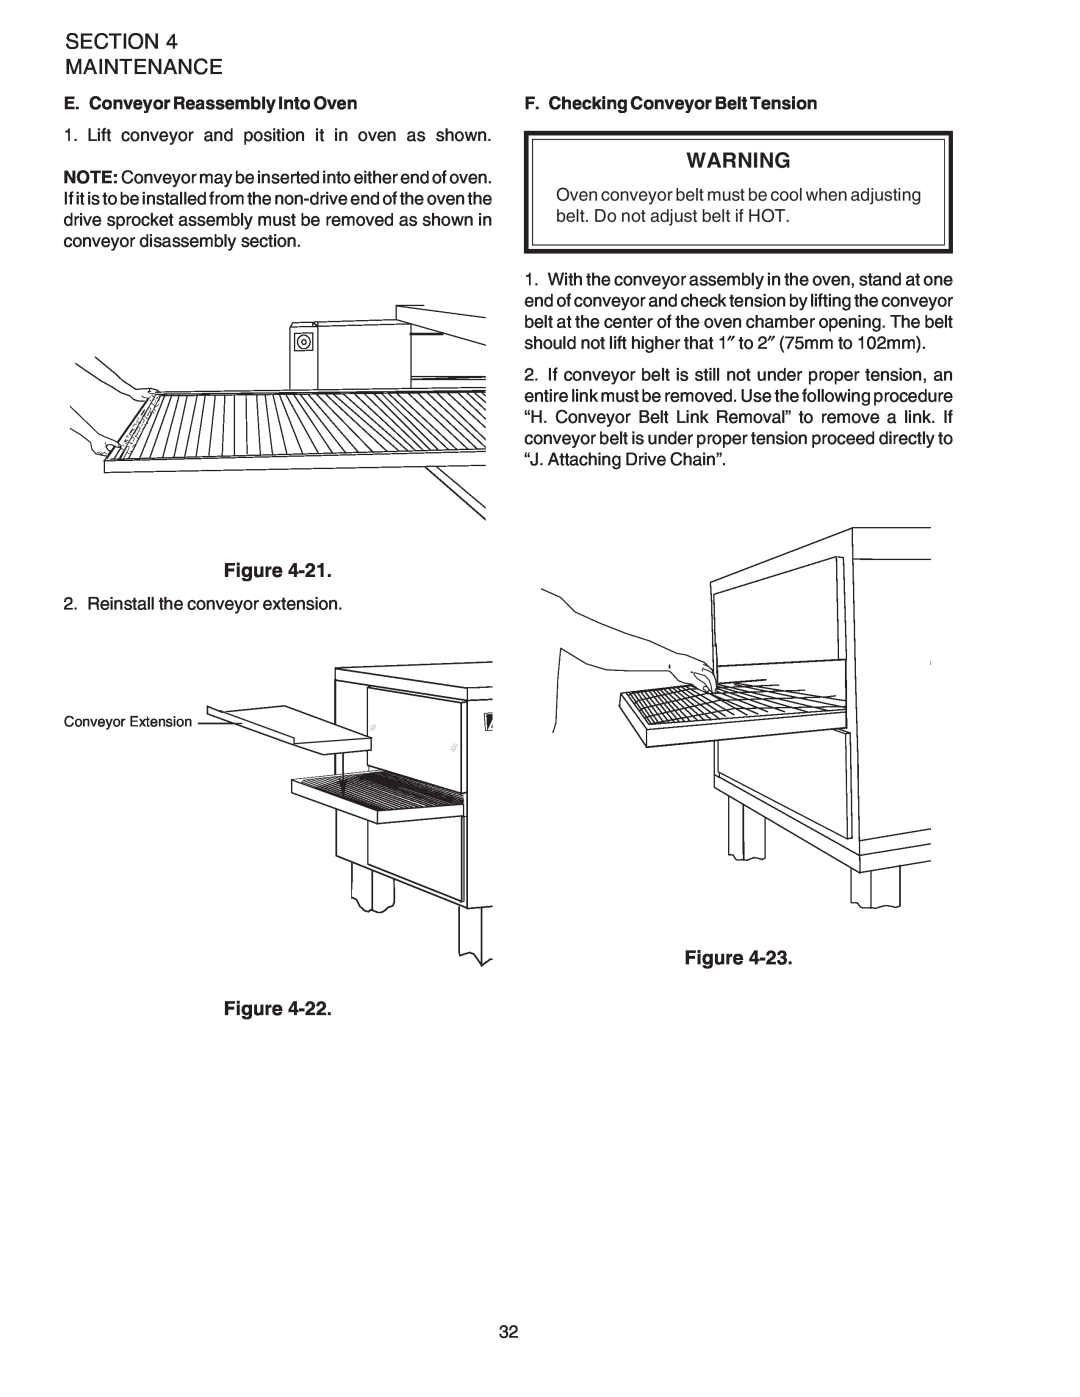 Middleby Marshall PS520 installation manual Section Maintenance, Figure Figure, E. Conveyor Reassembly Into Oven 